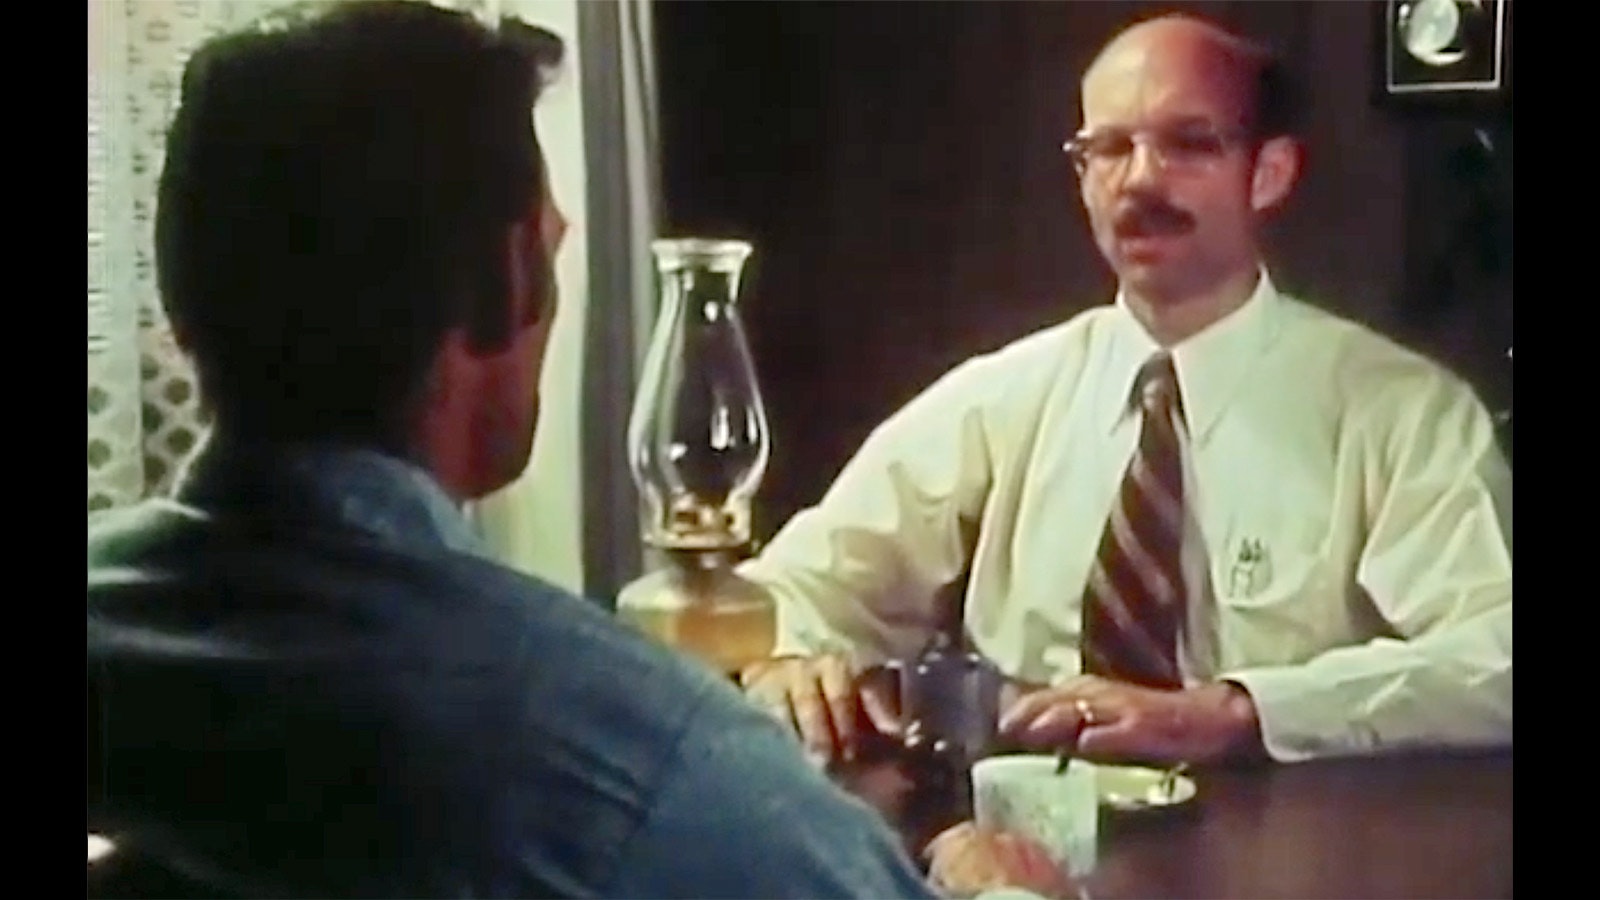 Carl Higdon, left, being hypnotized by Dr. Leo Sprinkle on the TV show "In Search Of" in 1978.